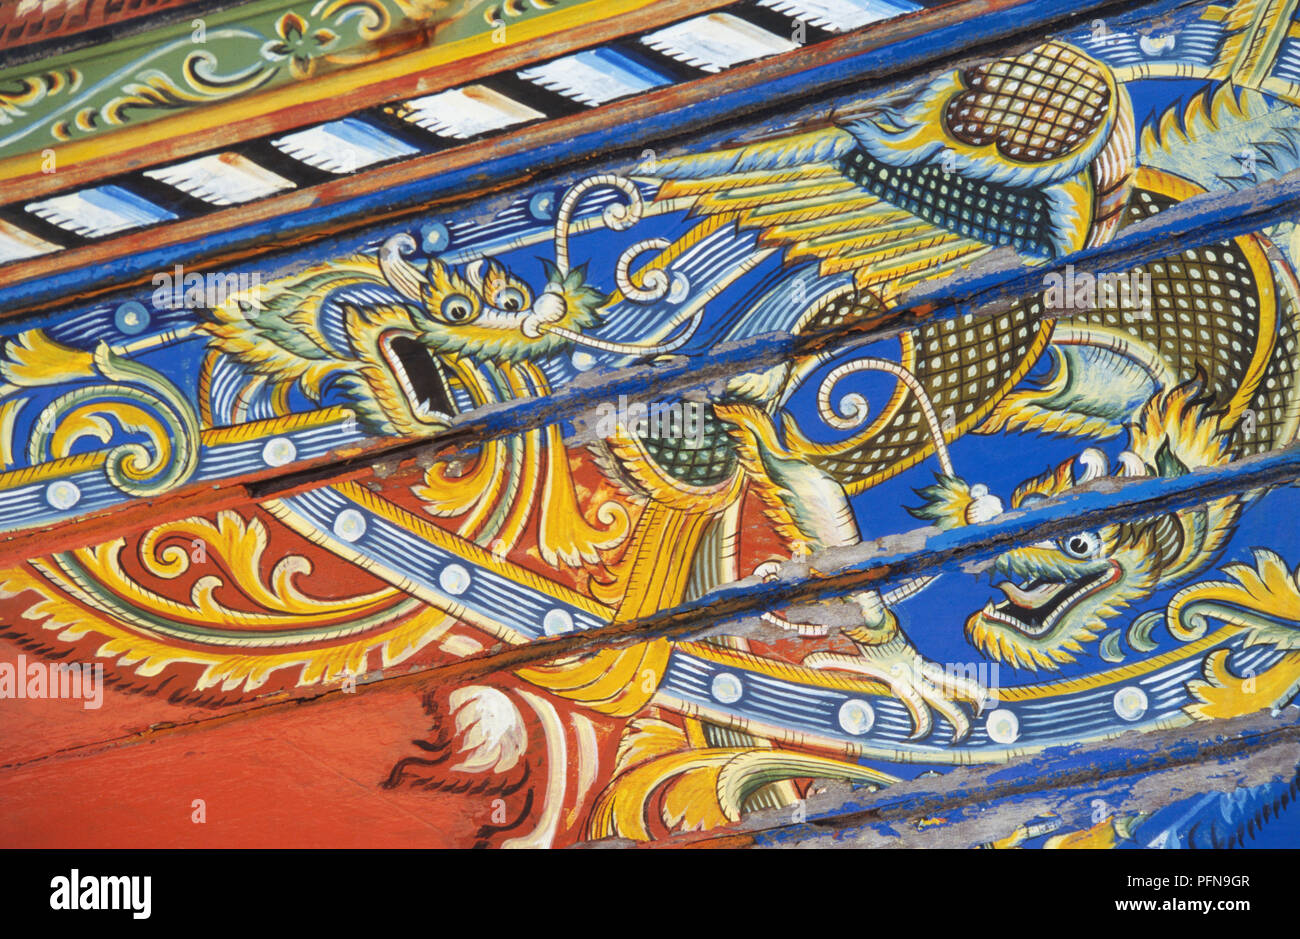 Thailand, intricately painted battling dragons on the side of decorated korlae boat. Stock Photo